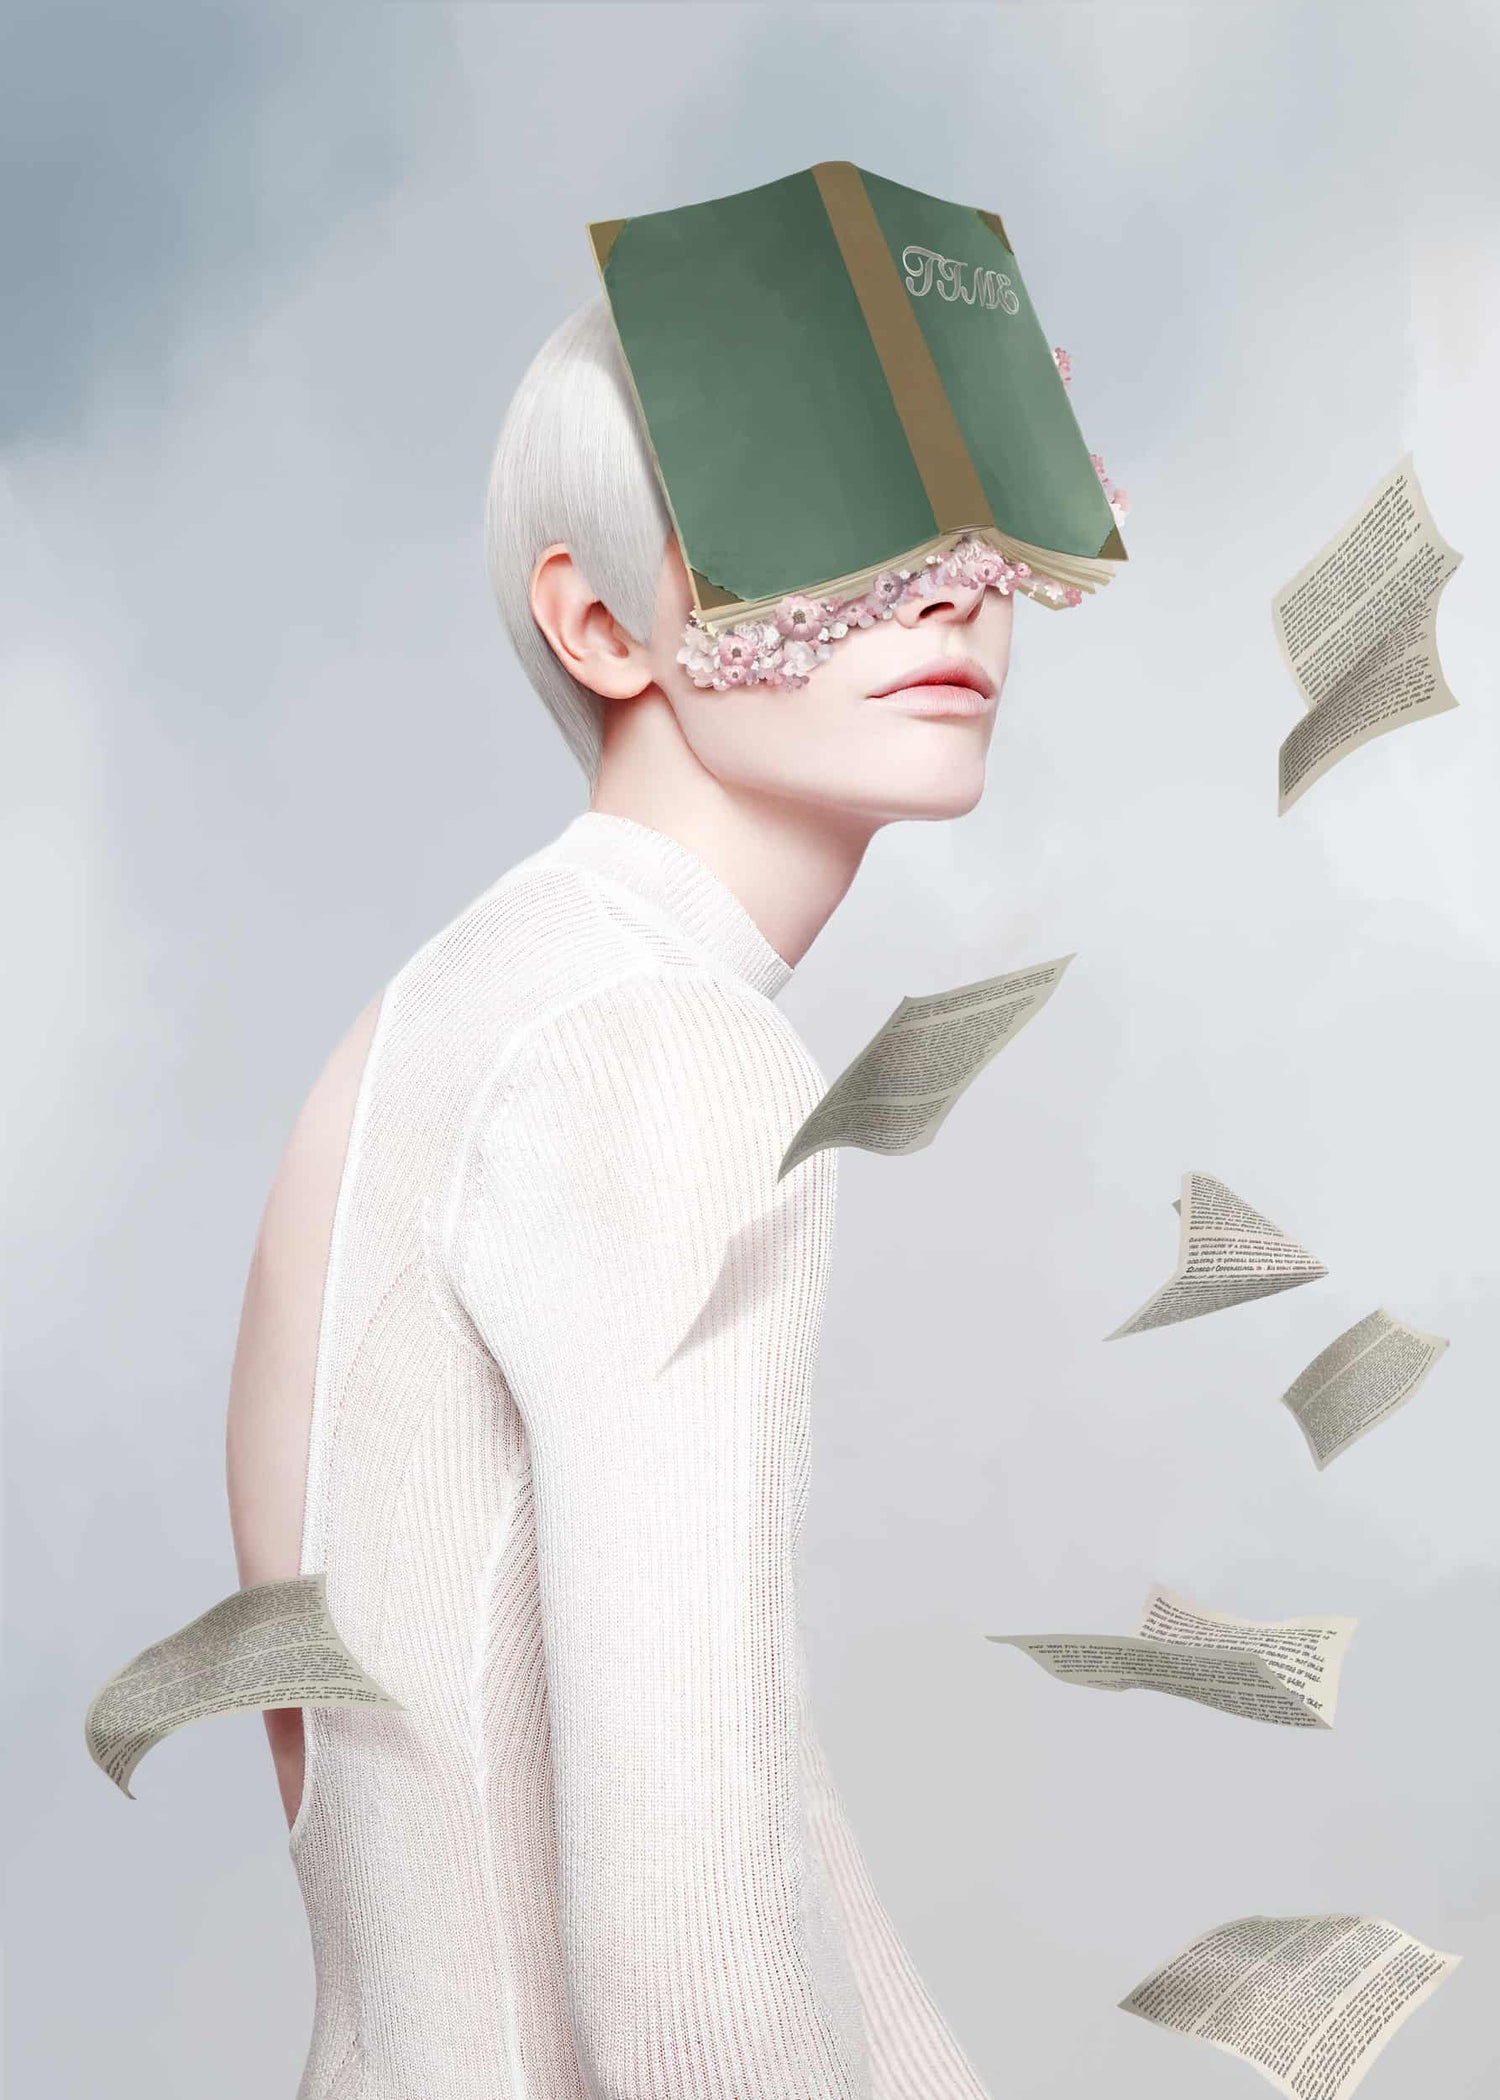 The artpiece 'Time' by Yang Han shows a woman, with a book stuck to her head and pages from a book falling down all around her.